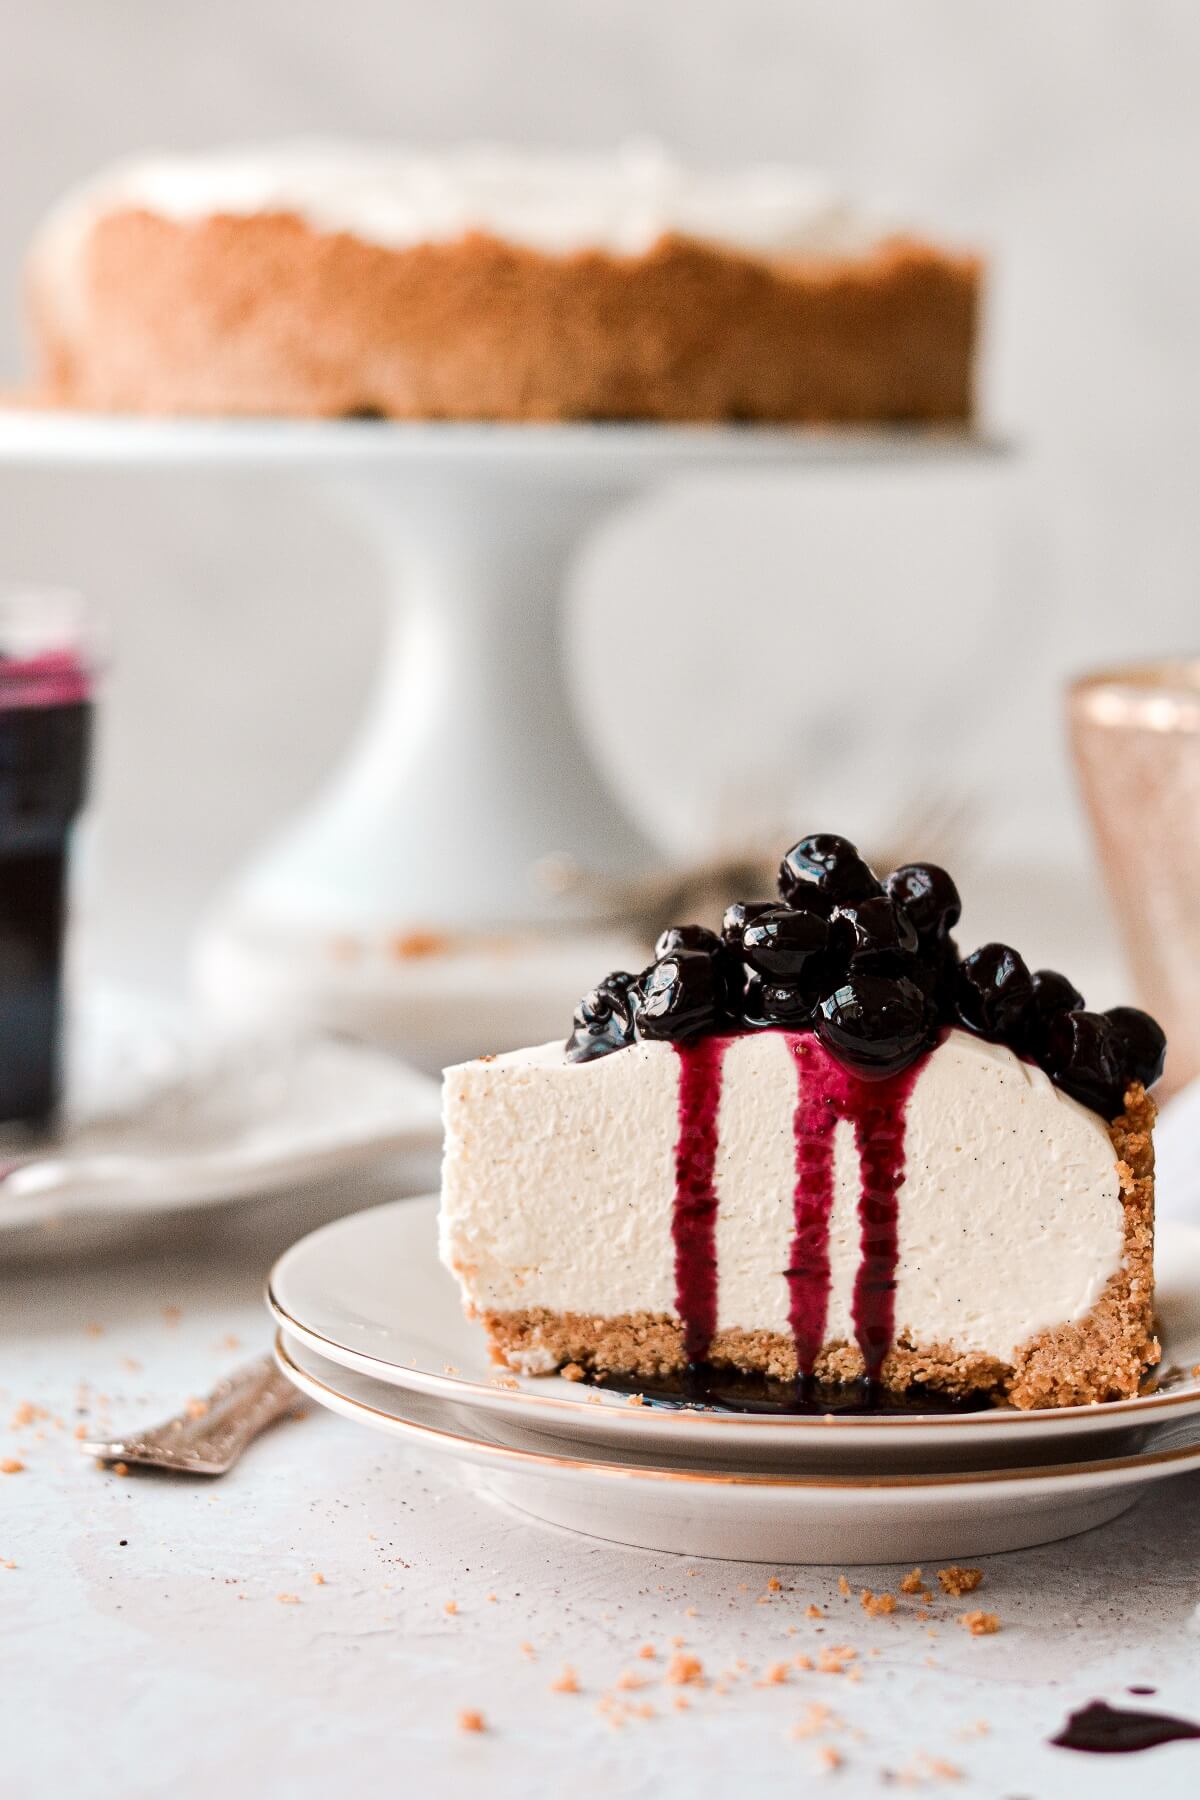 A piece of no bake vanilla cheesecake with blueberry sauce.